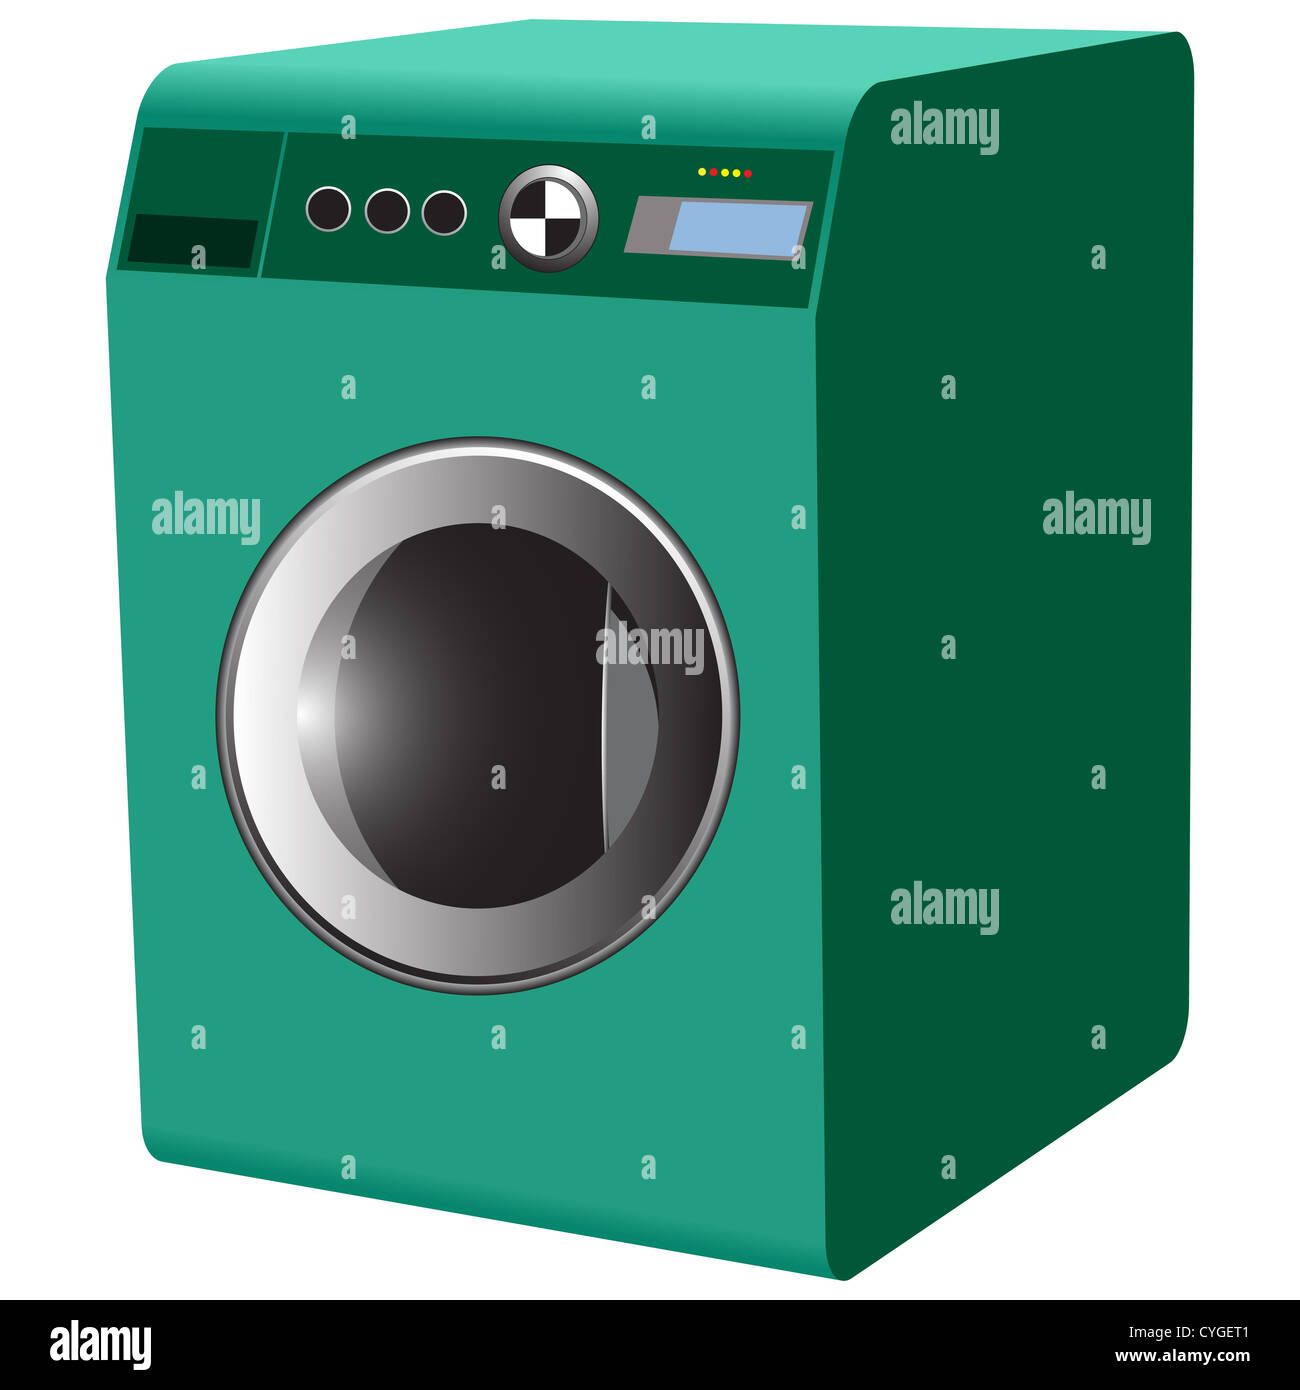 washing machine against white background, abstract vector art illustration Stock Photo